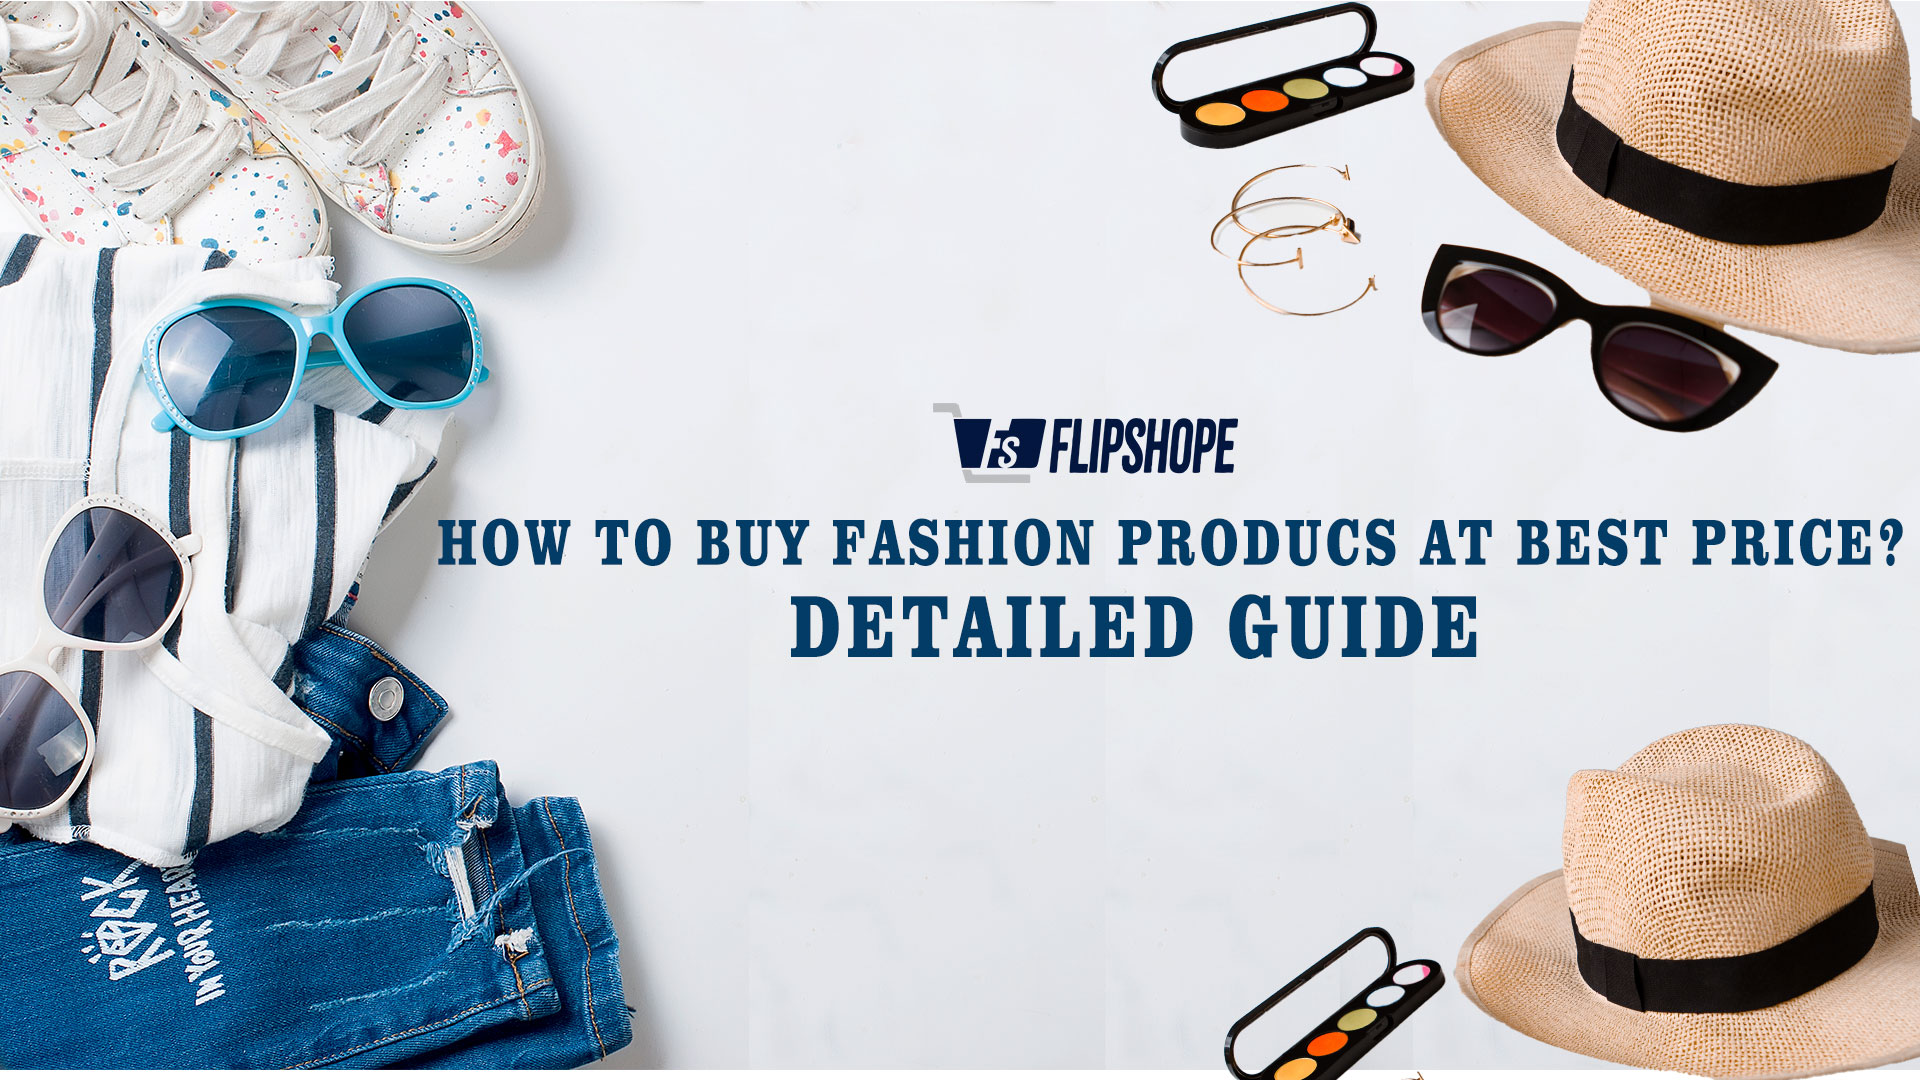 How to buy fashion products at best price?